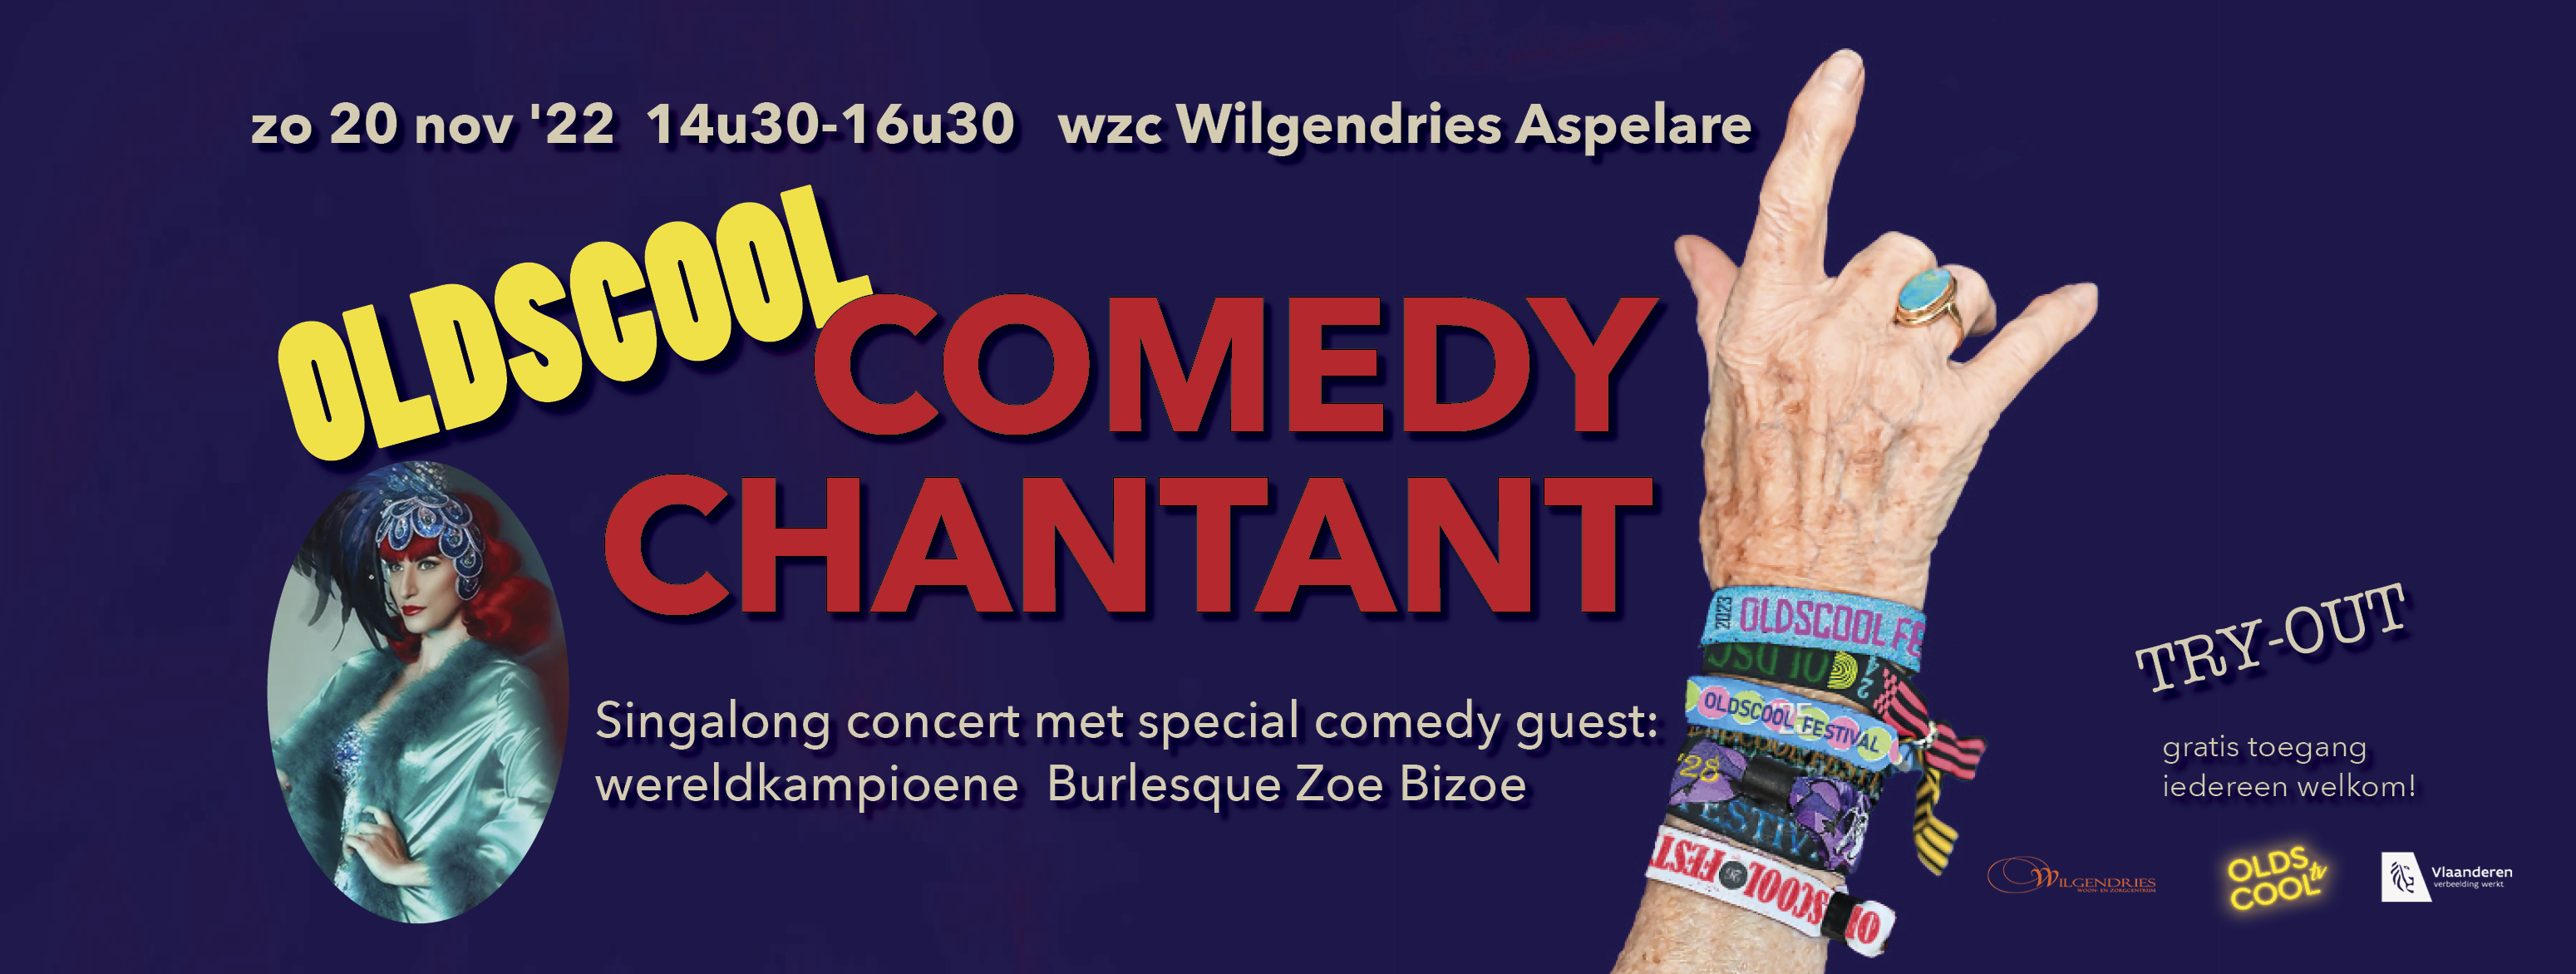 ‘Comedy Chantant’ in wzc Wilgendries